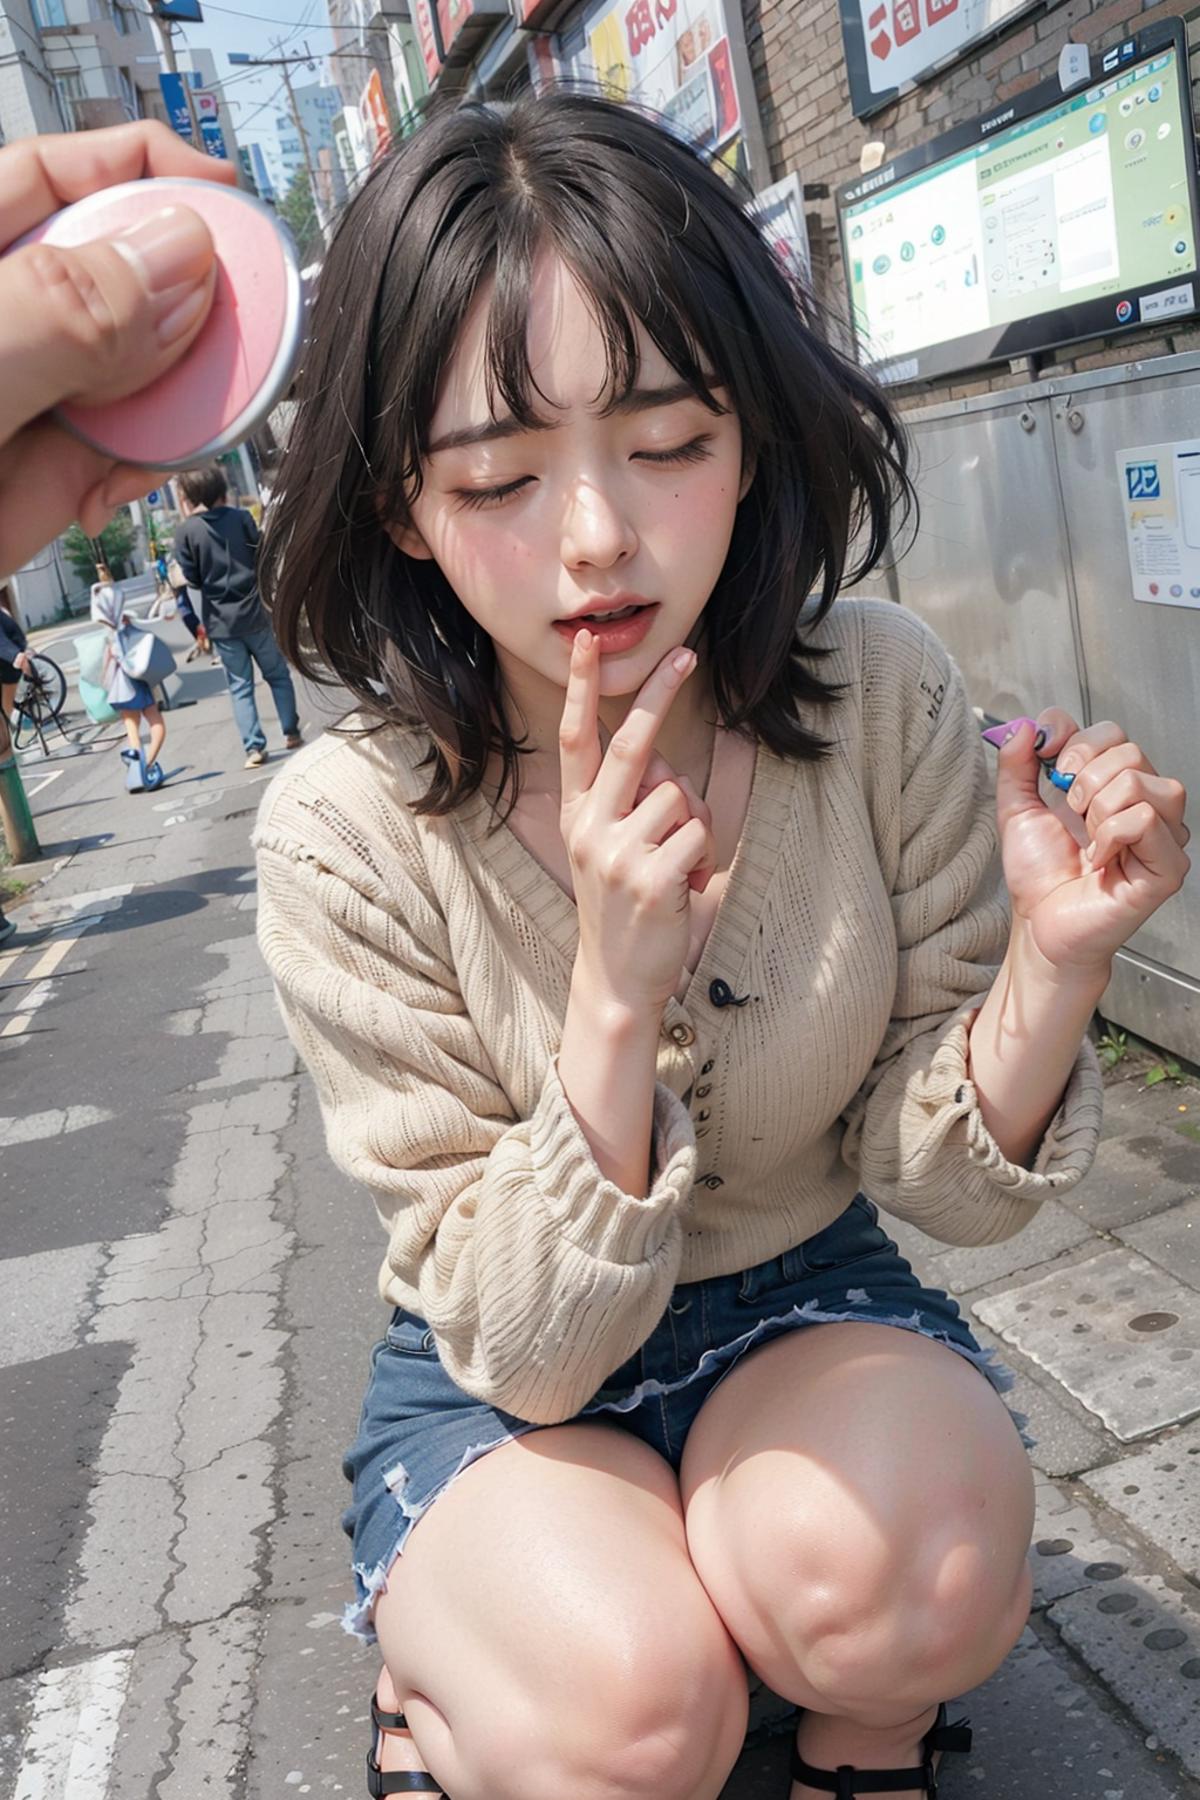 A young woman with a short haircut is sitting on the sidewalk and holding a pink item next to her mouth. She is wearing a beige sweater and blue shorts.